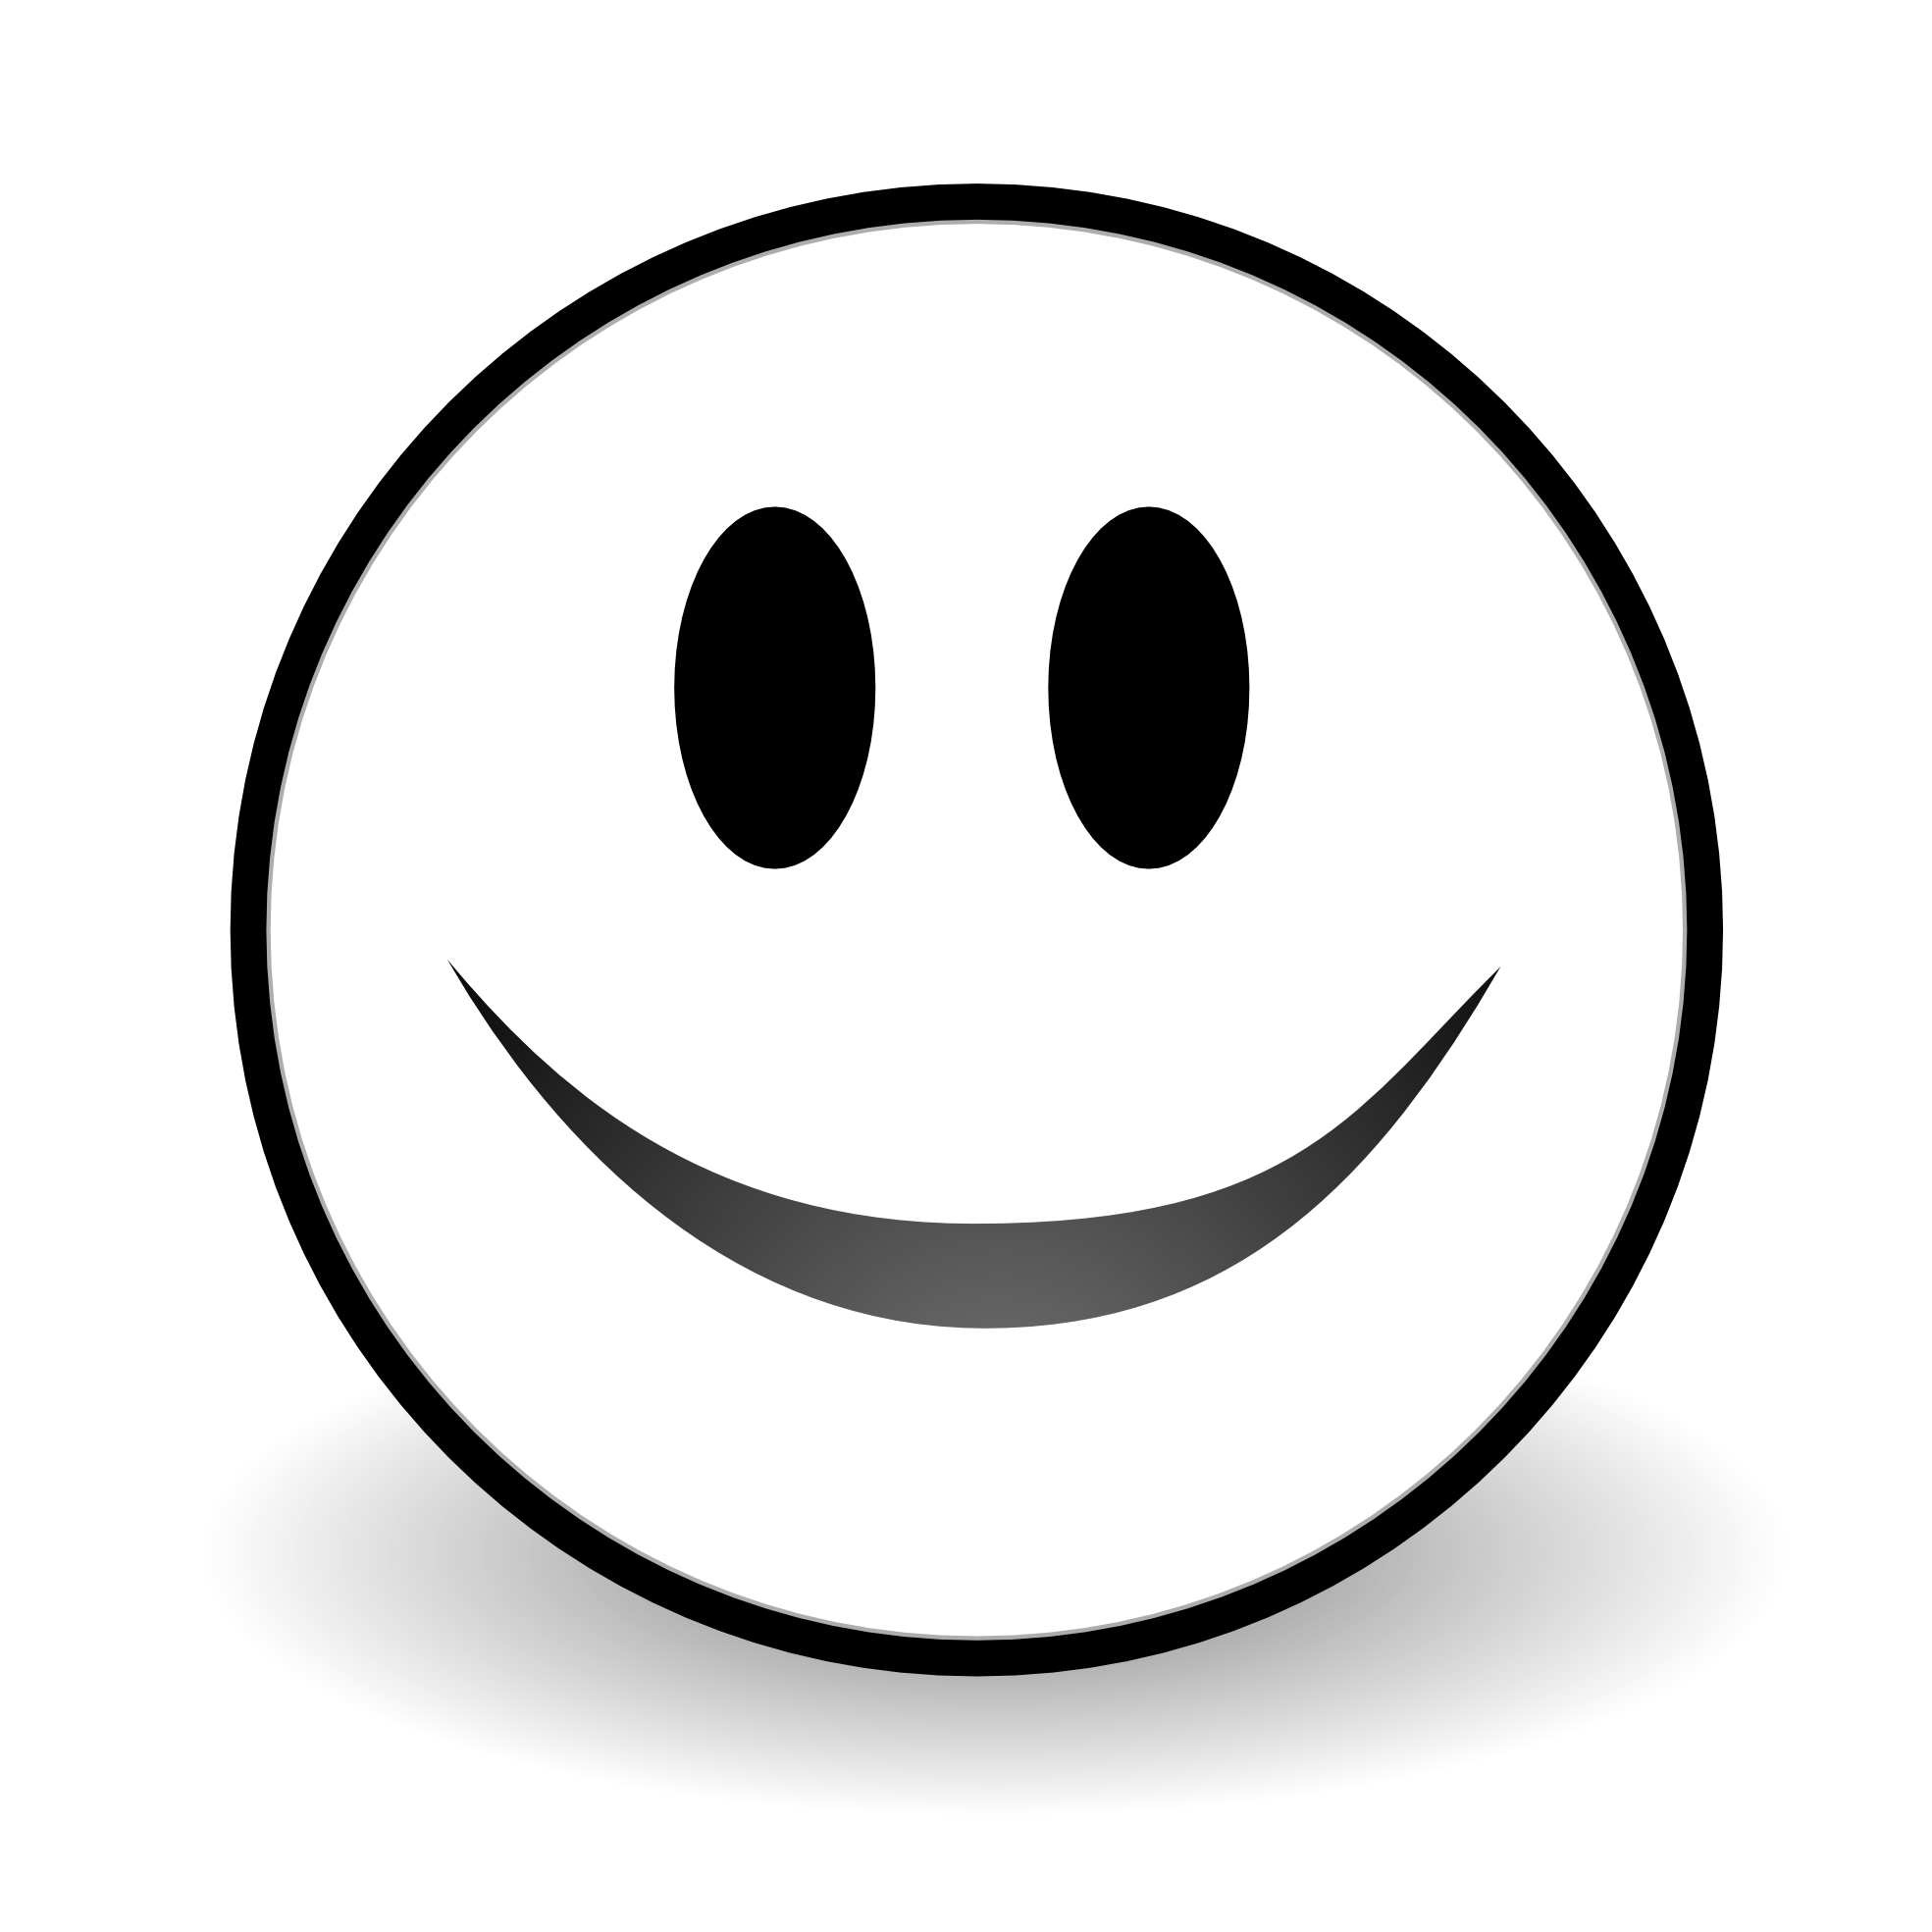 Smile Clipart Black And White | Clipart Panda - Free Clipart Images